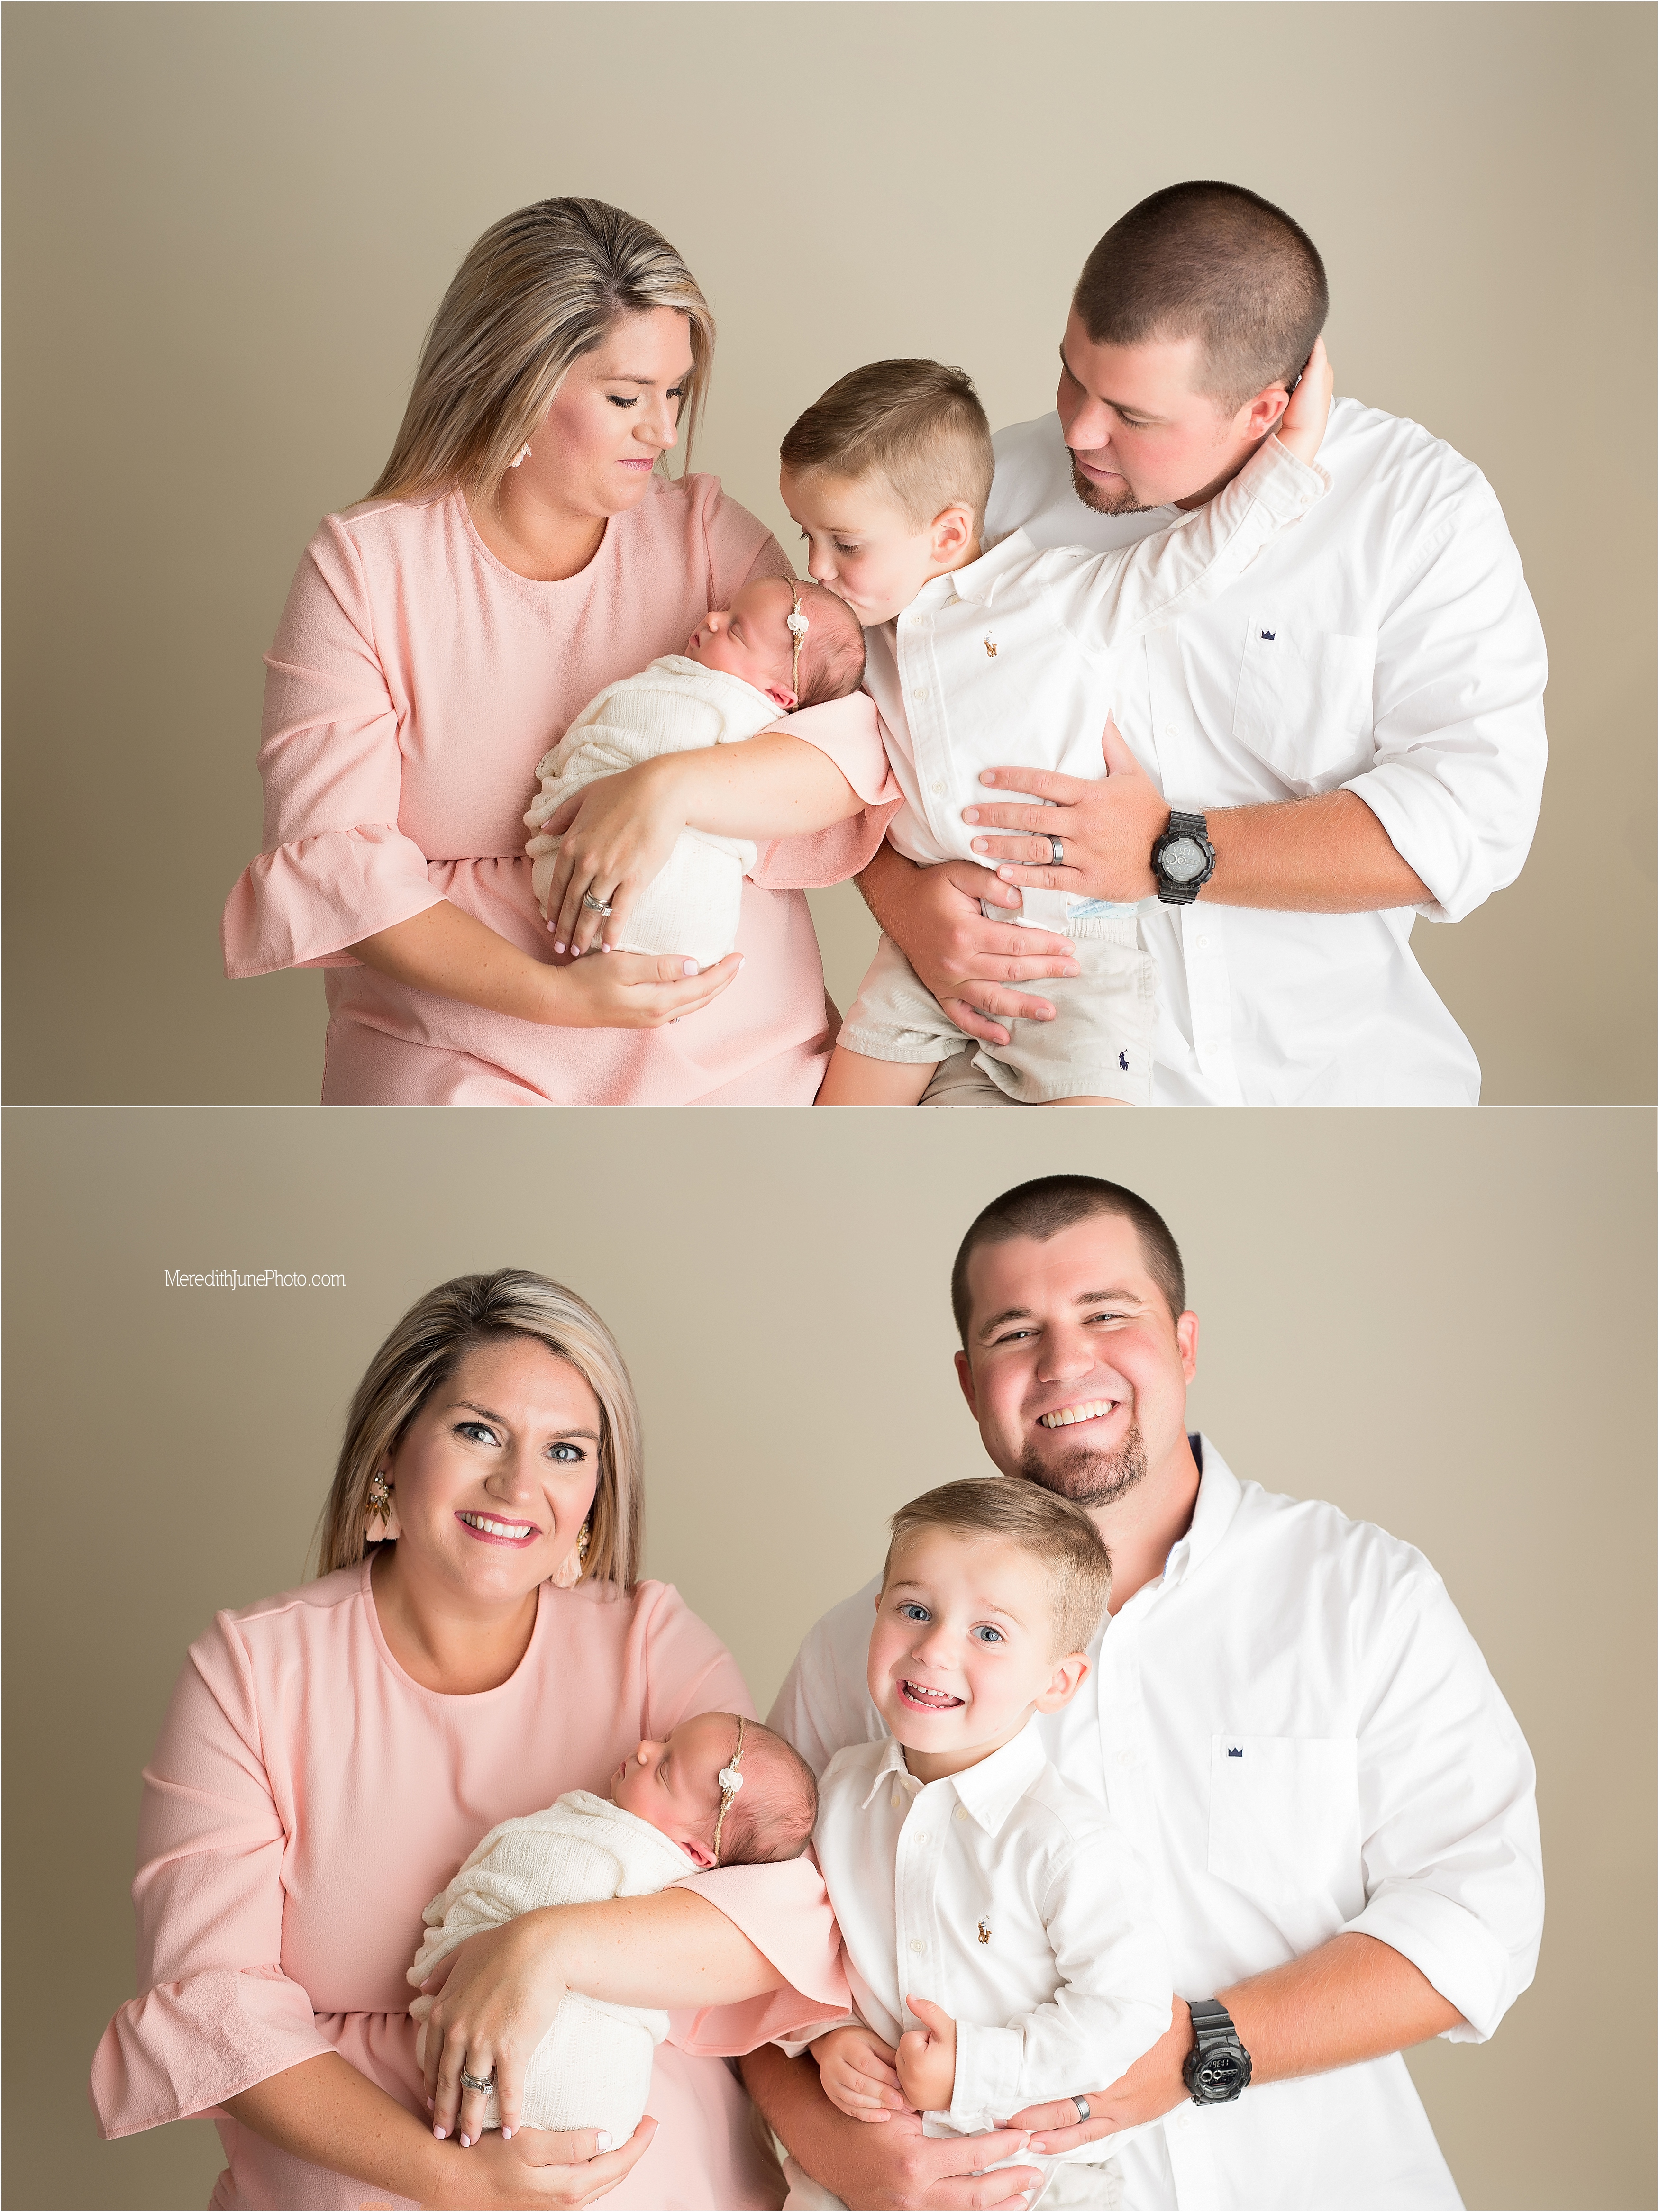 Baby girl with family during newborn session at Meredith June Photography 